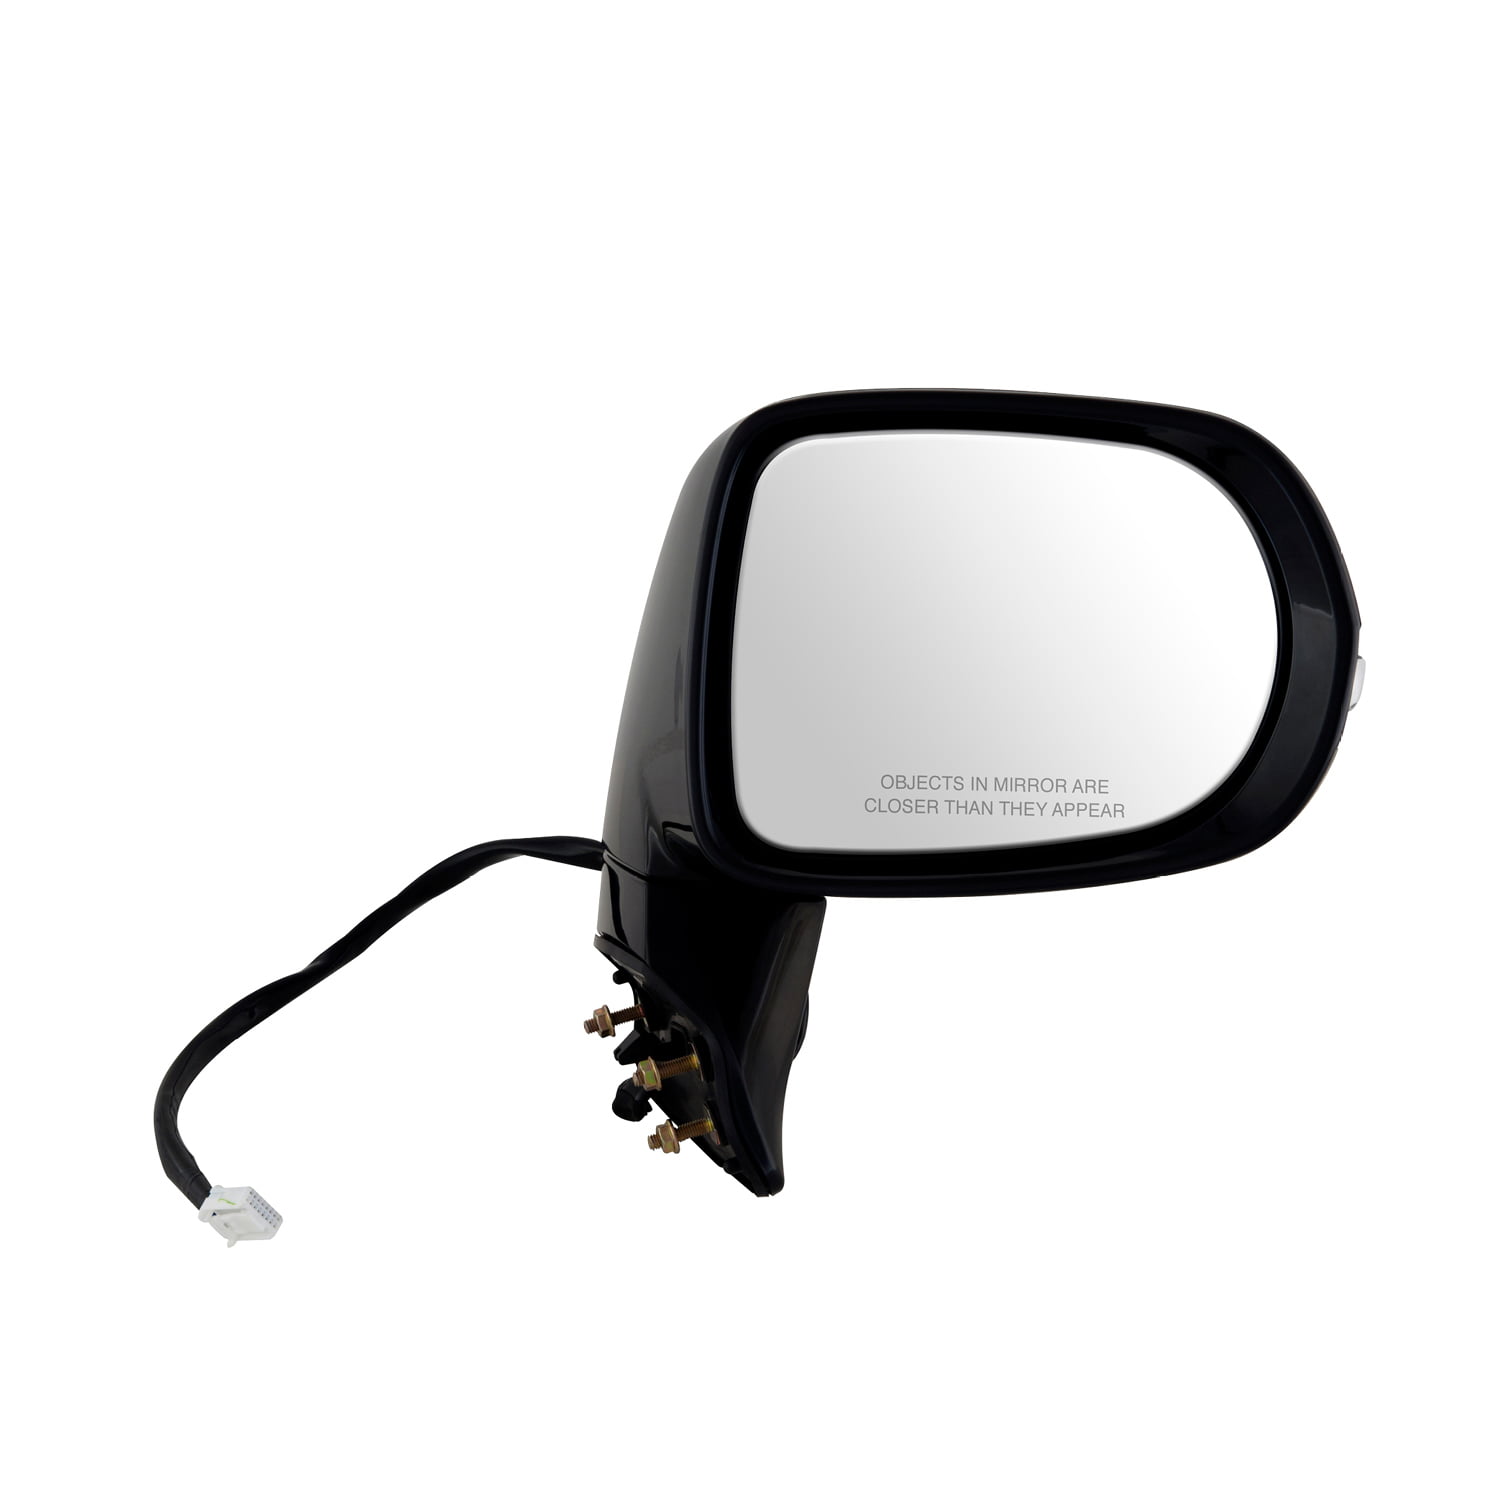 w/o Blind spot Detection w/o auto dimming Black PTM Memory Fit System Driver Side Mirror for Lexus RX350 Canada & Japan Built Puddle lamp w/Turn Signal RX450h Heated Power Power Folding 